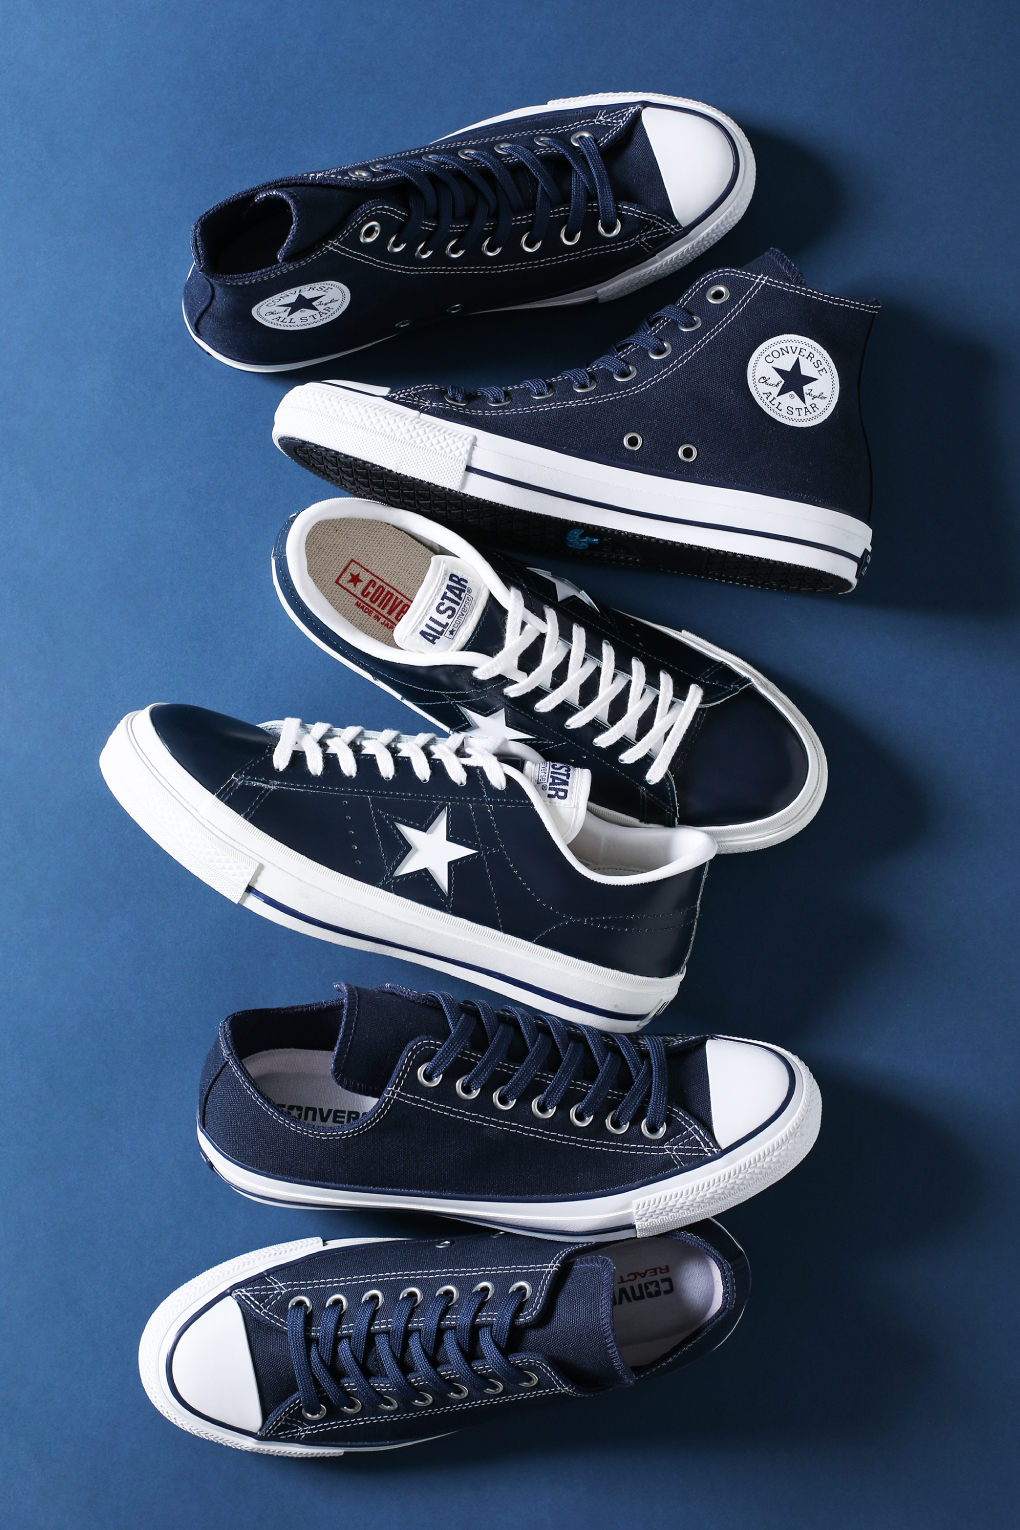 CONVERSE MIDNIGHT BLUE PACK “ONE STAR J” 5/27(Fri)Release! | SHOES